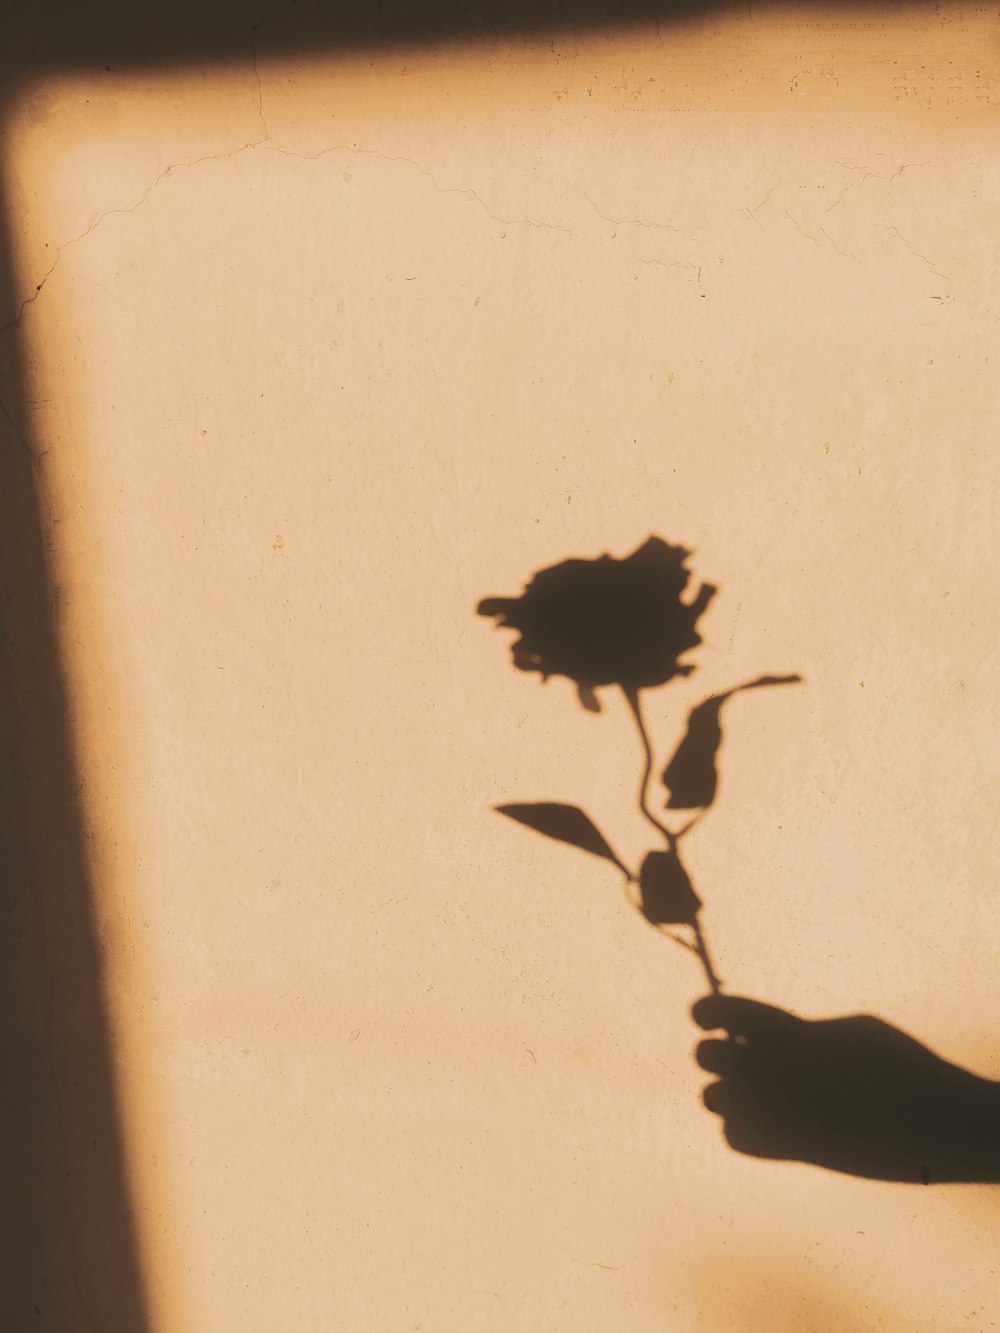 a shadow of a person holding a flower